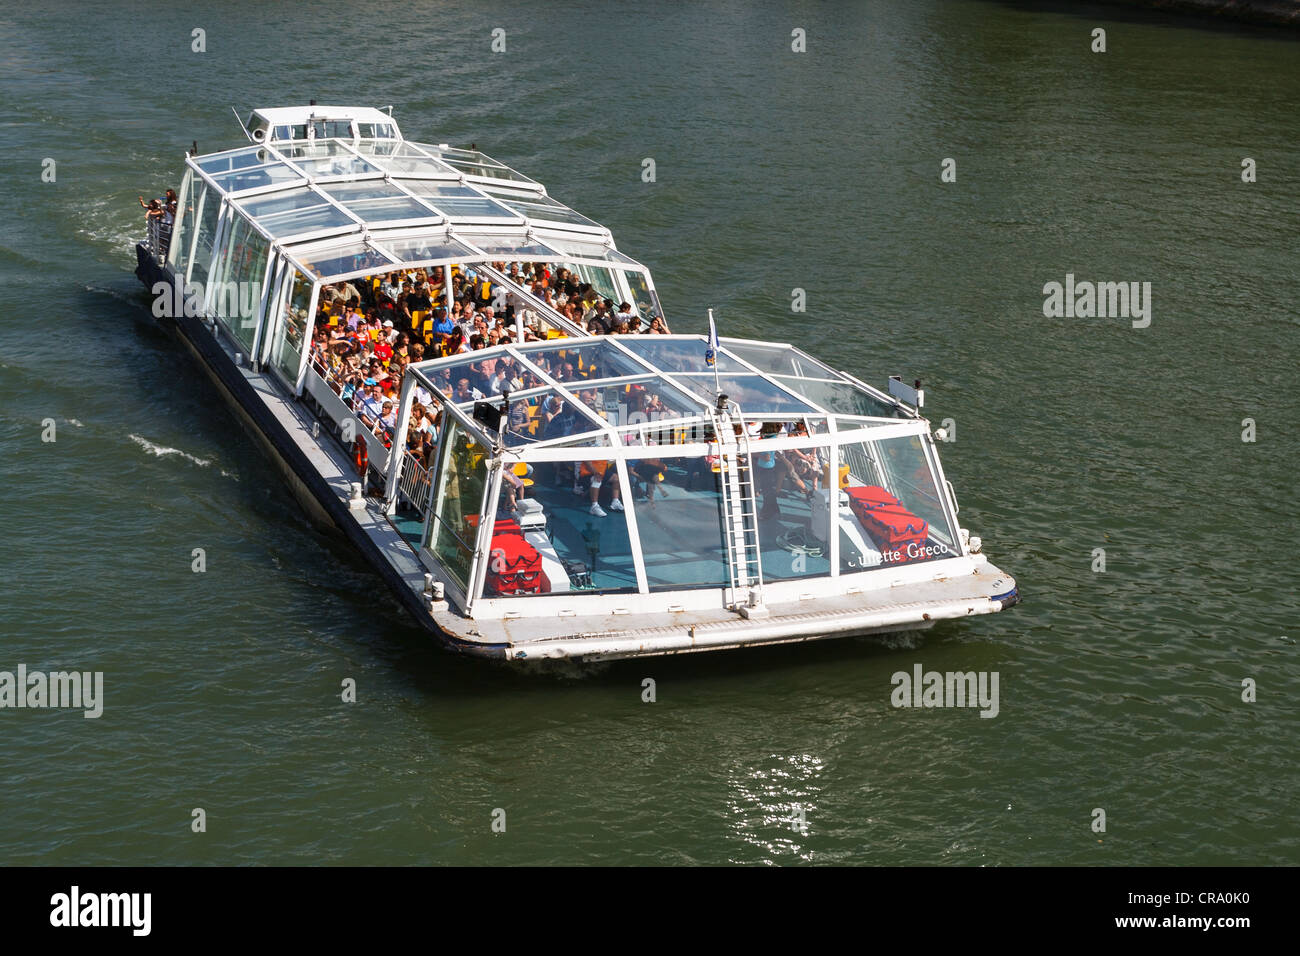 People on a boat tour on the Seine River - Paris, France Stock Photo